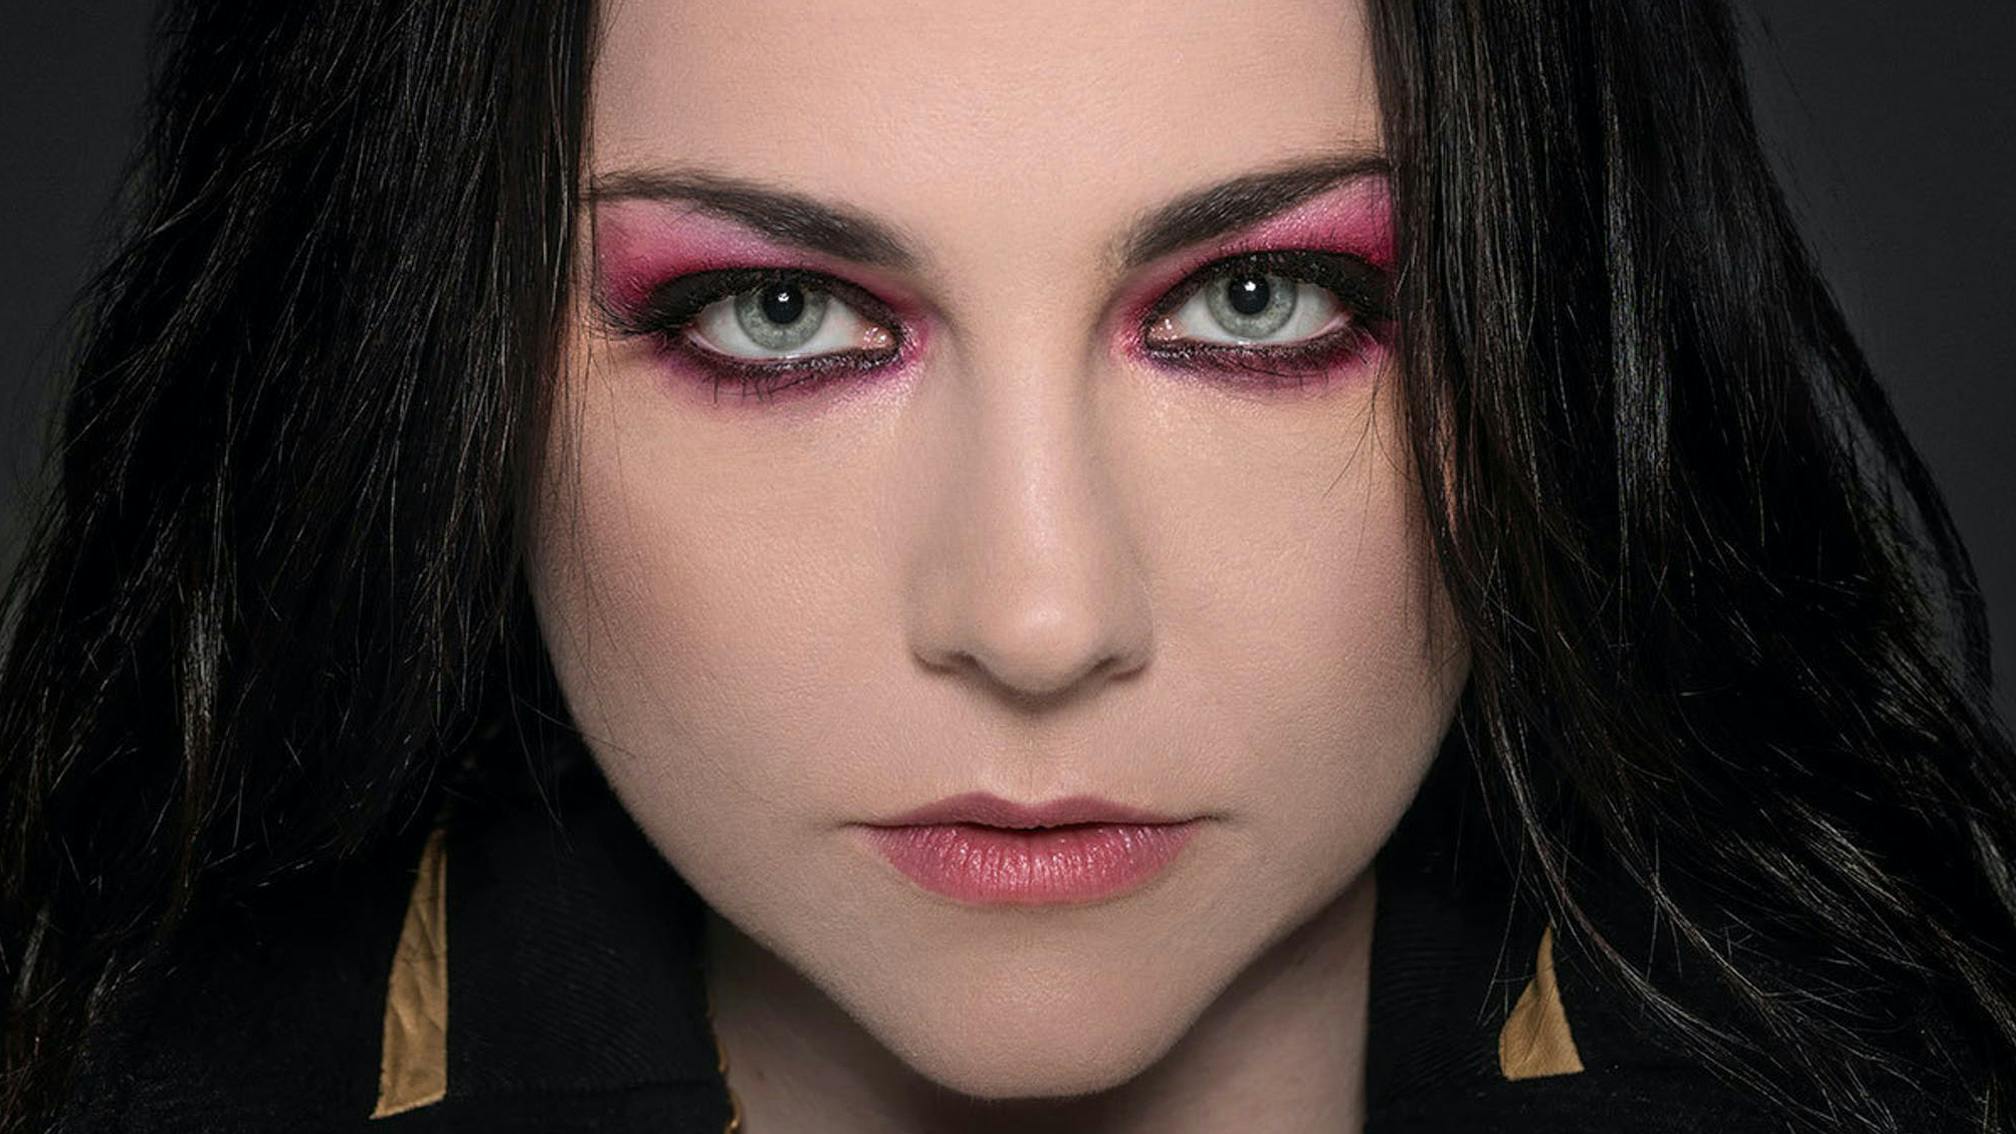 Evanescence's Amy Lee: “I have total hope… but it's important to be ready to fight when it's time”